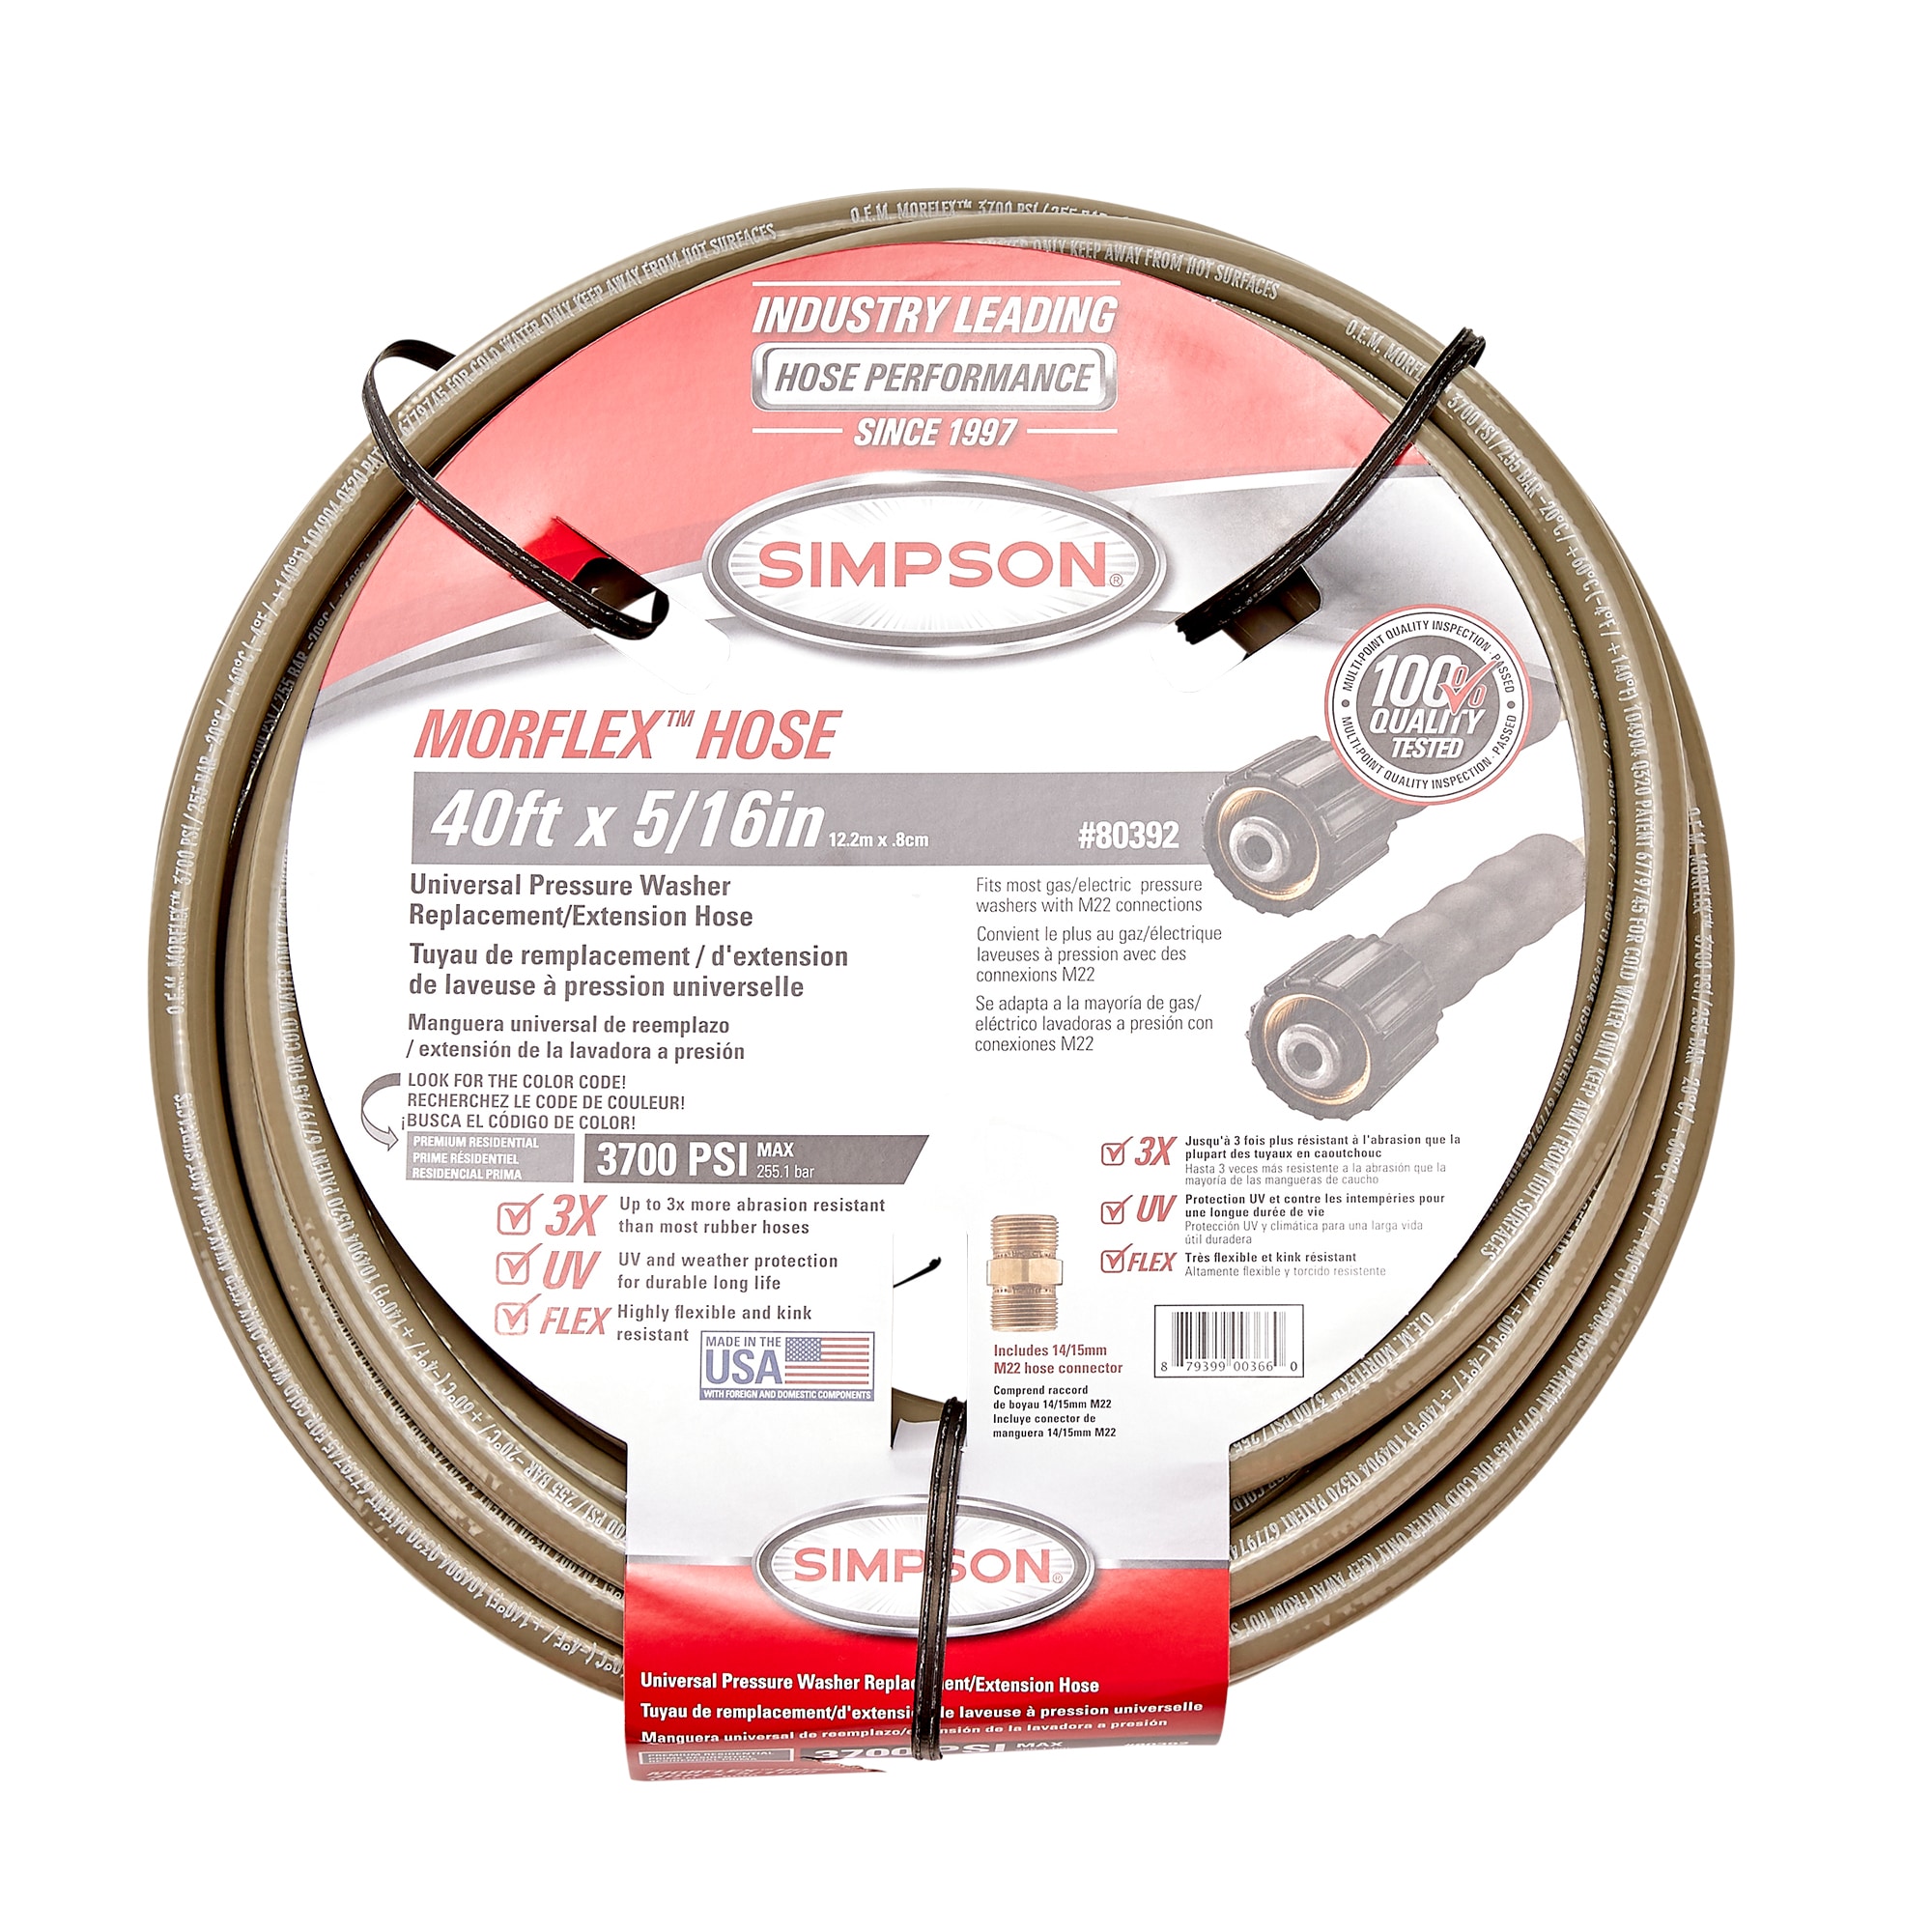 SIMPSON MorFlex 5/16-in x 40-ft Pressure Washer Hose in the